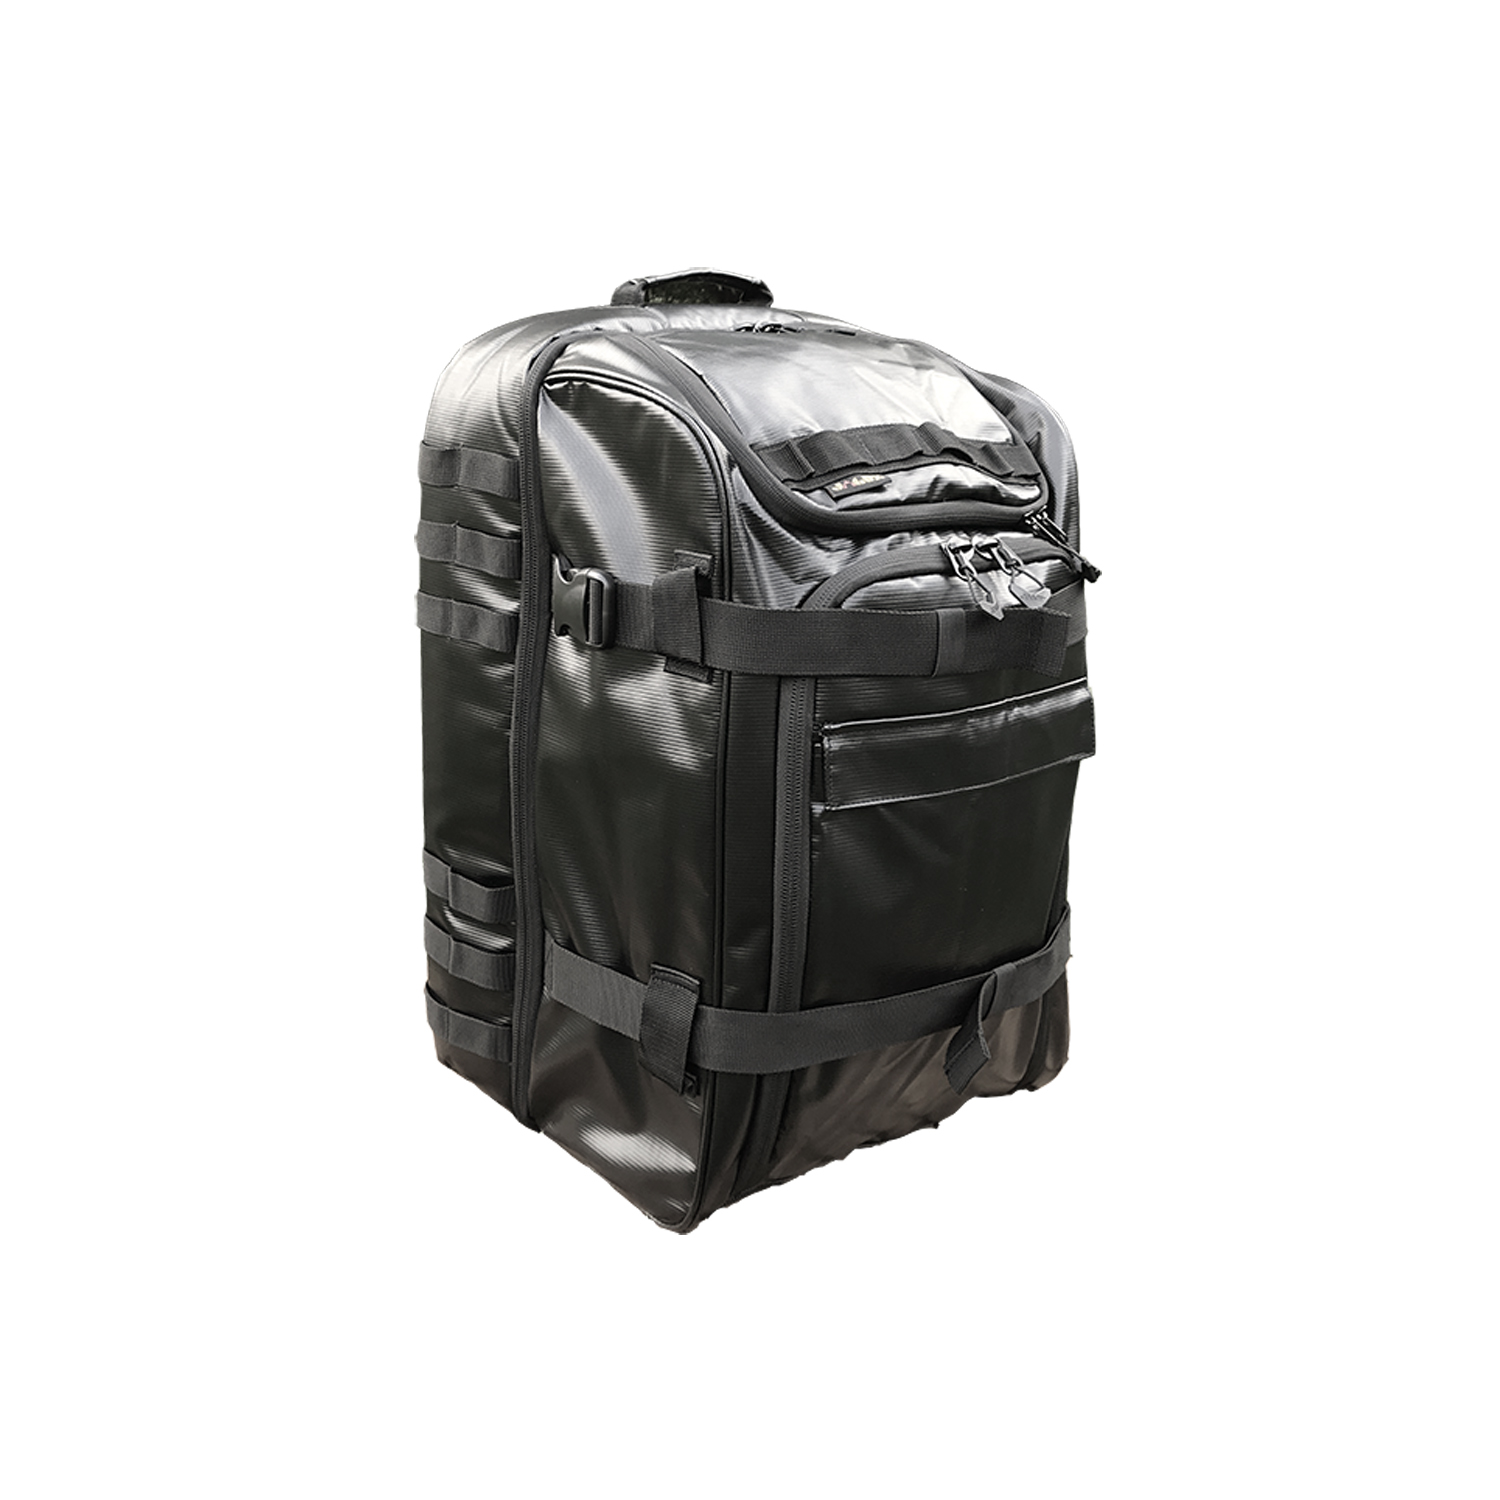 BLACK LINE ALL IN ONE 3 WAY GEAR BAG